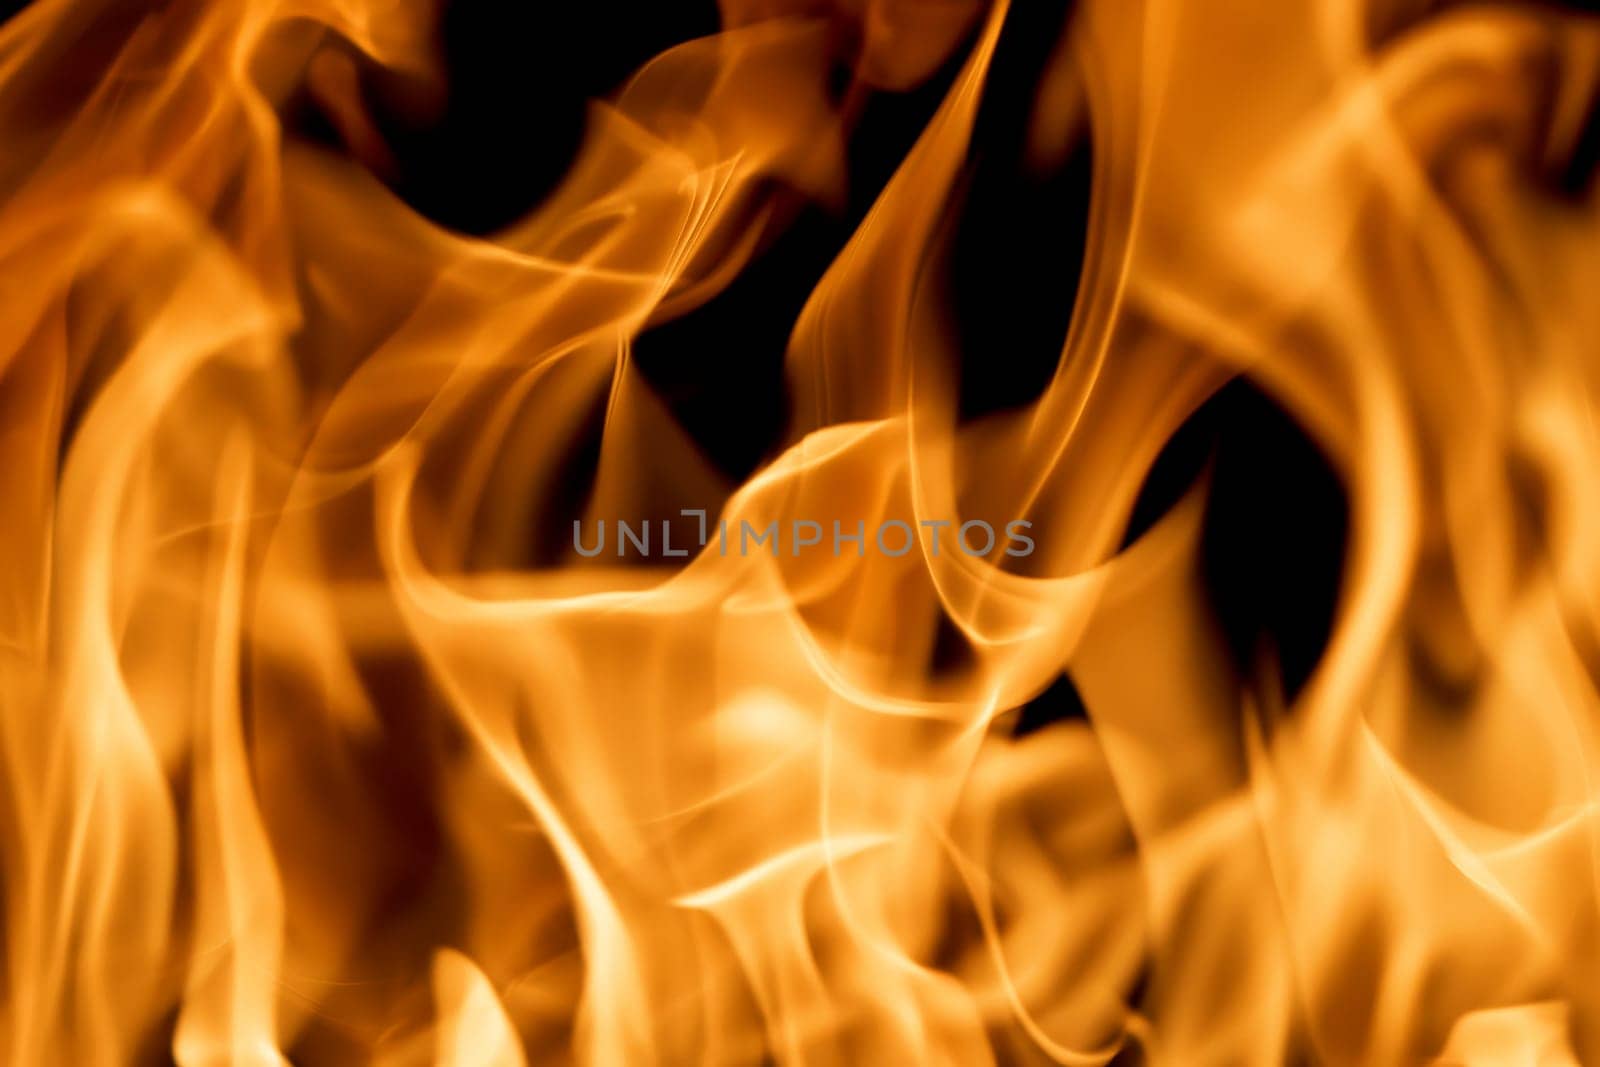 firestorm. Fire burning. Bright burning flames on a black background. Wall of Real fire, abstract background. Fire flames, isolated on dark background.